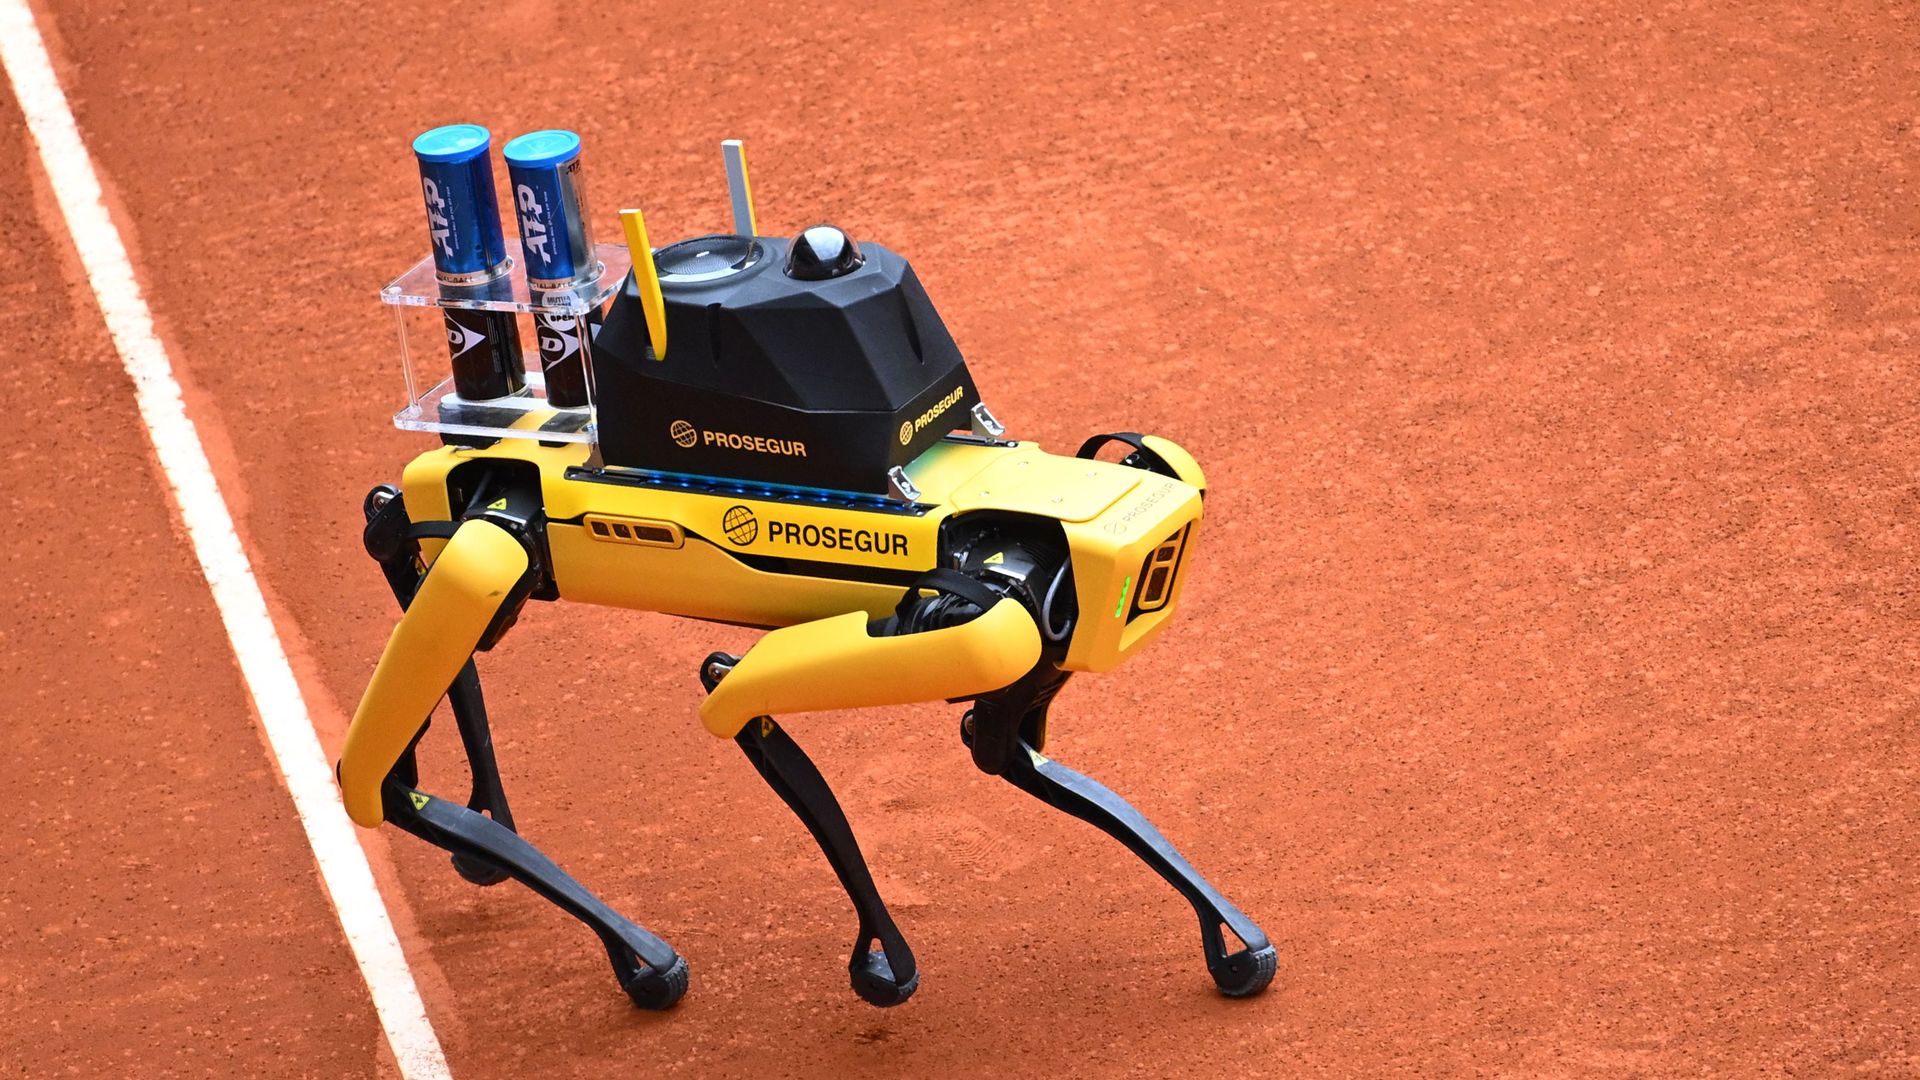 A robot dog carries tennis balls at the Madrid Open.